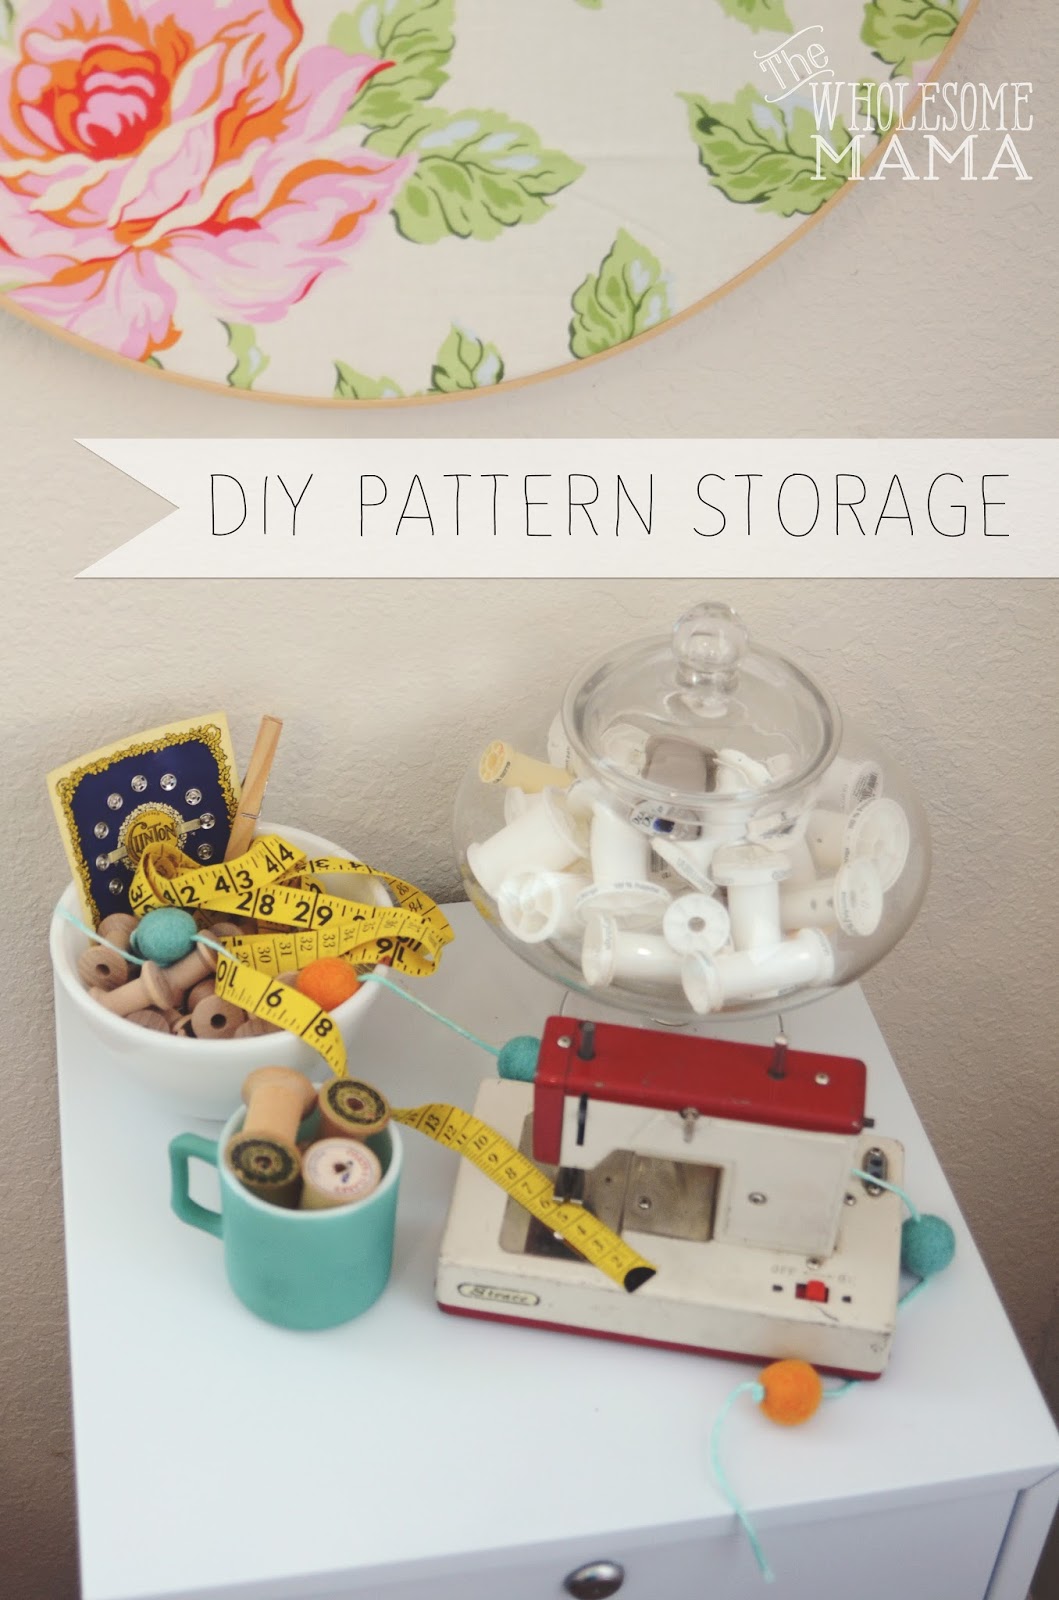 The Wholesome Mama Diy Pattern Storage Filing Cabinet Makeover